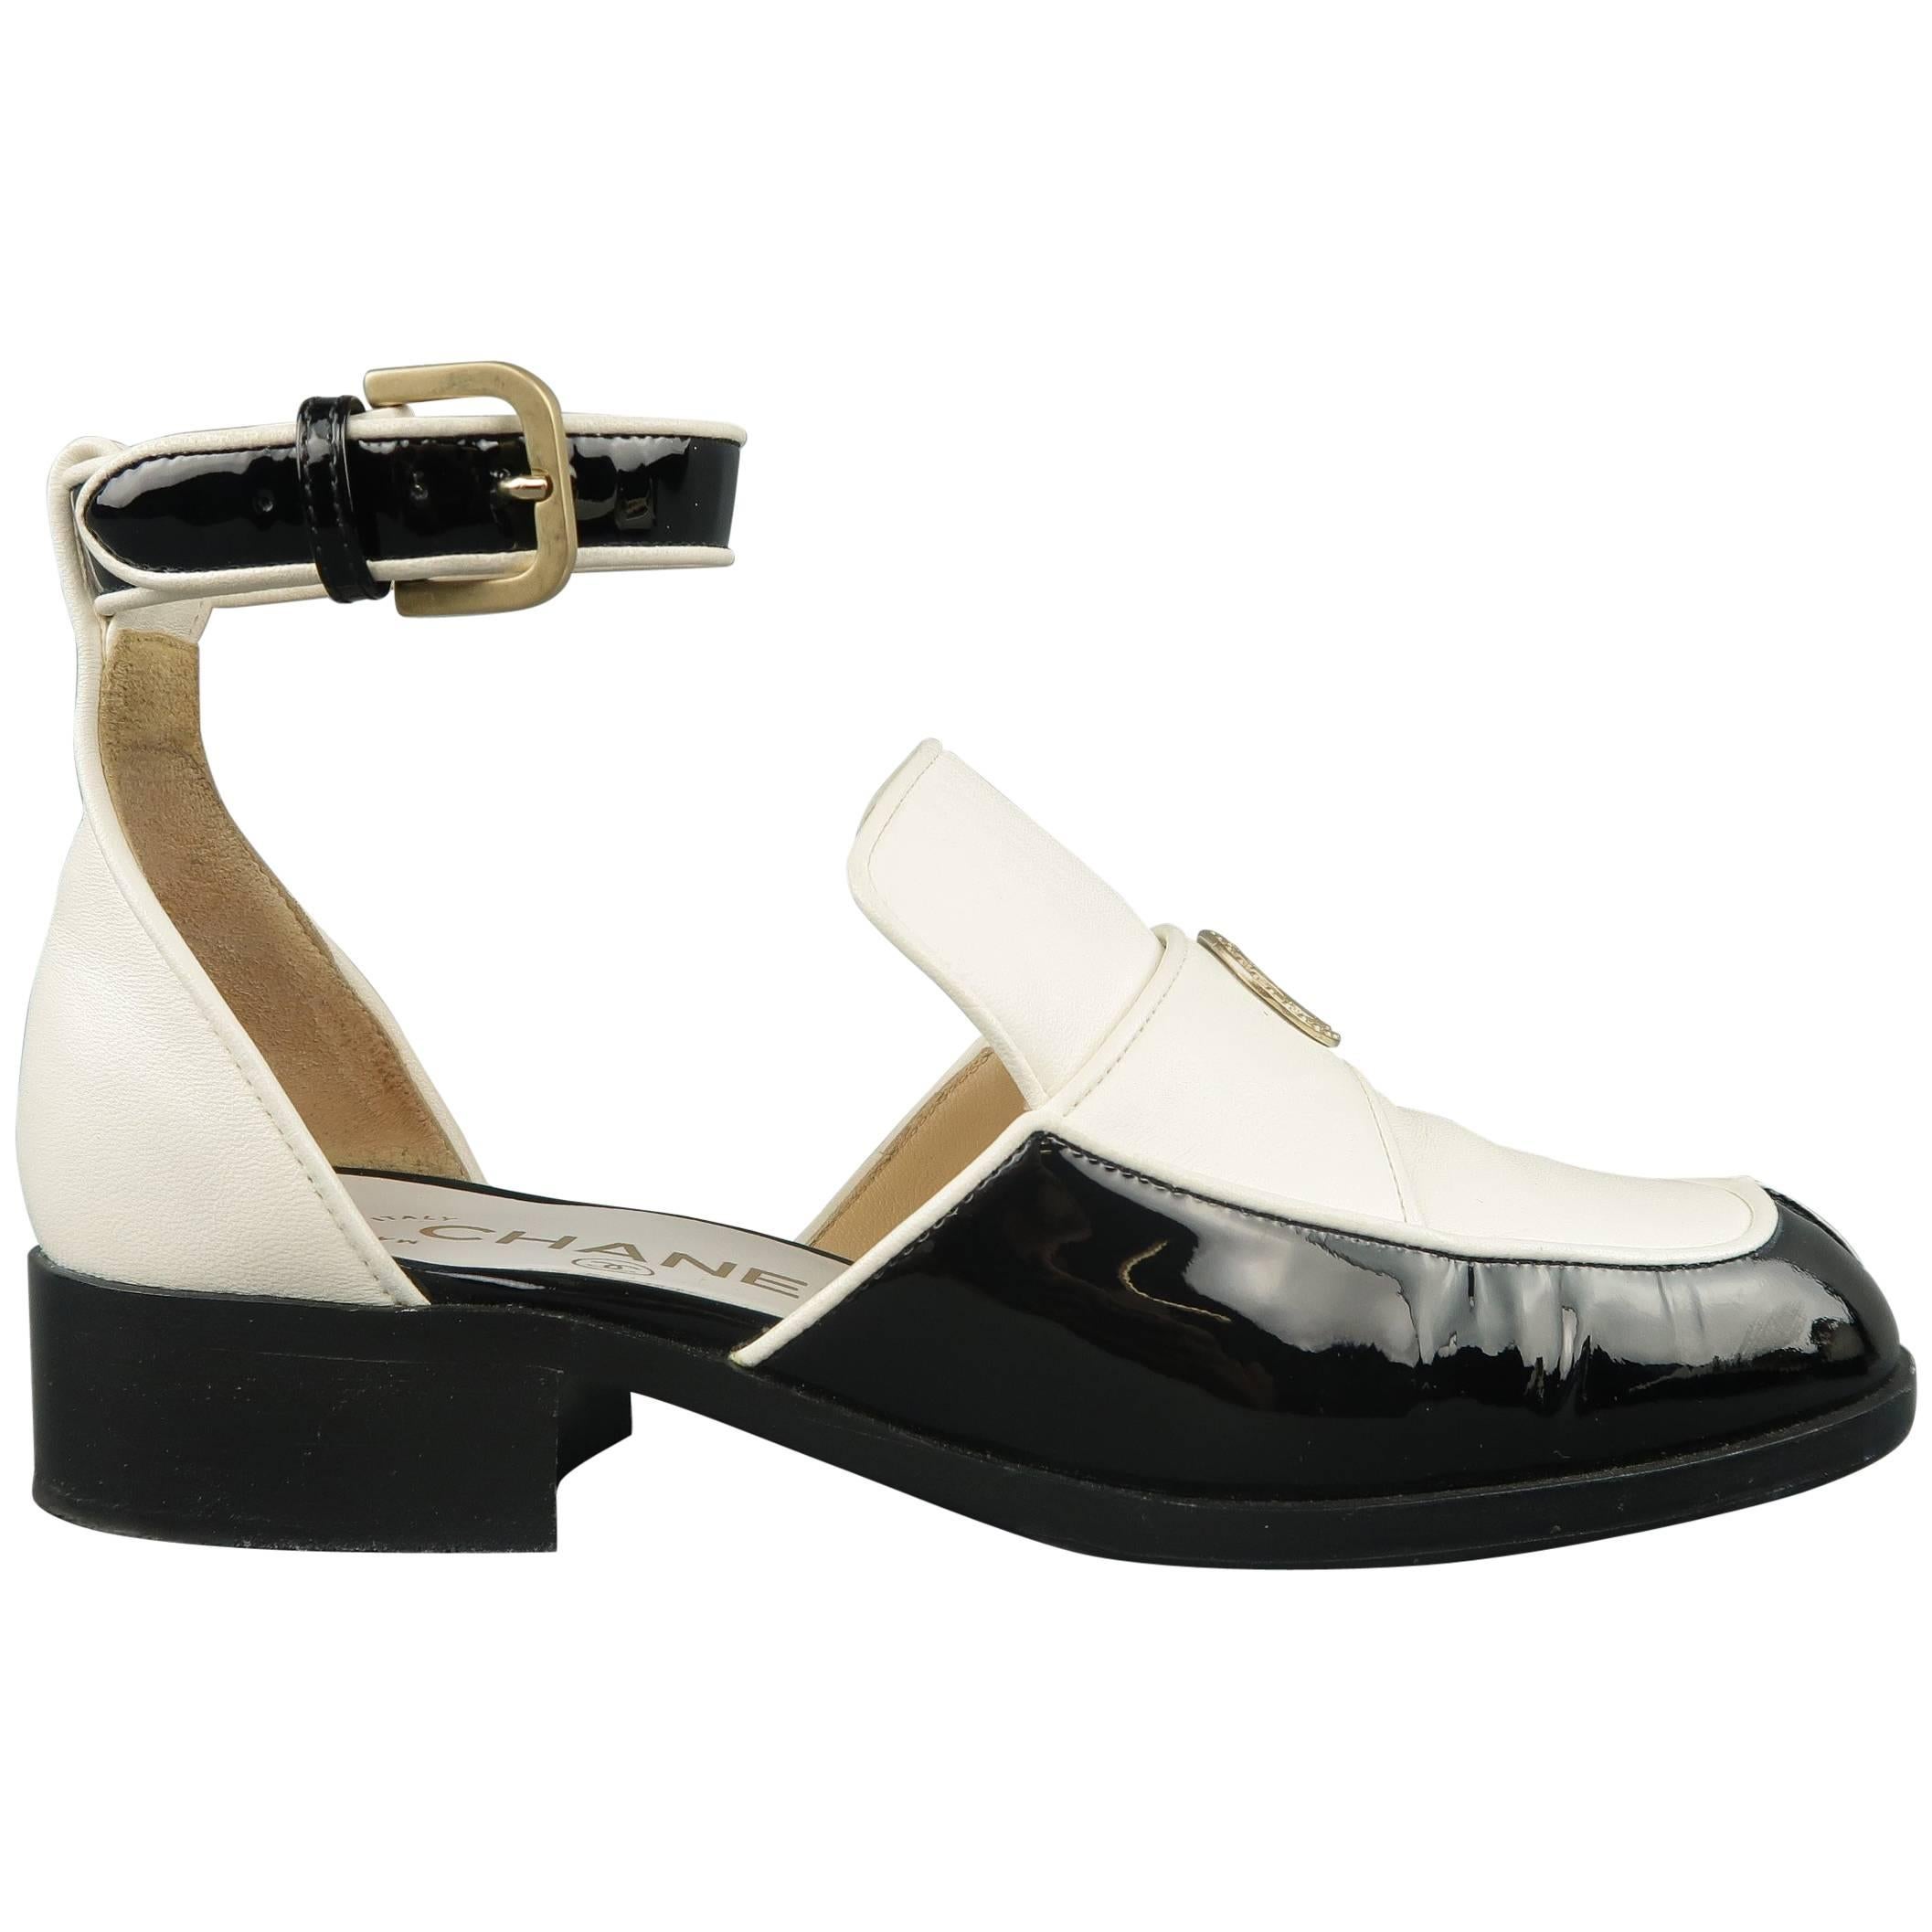 CHANEL Size 5.5 Black & White Leather Ankle Strap Loafer Flats